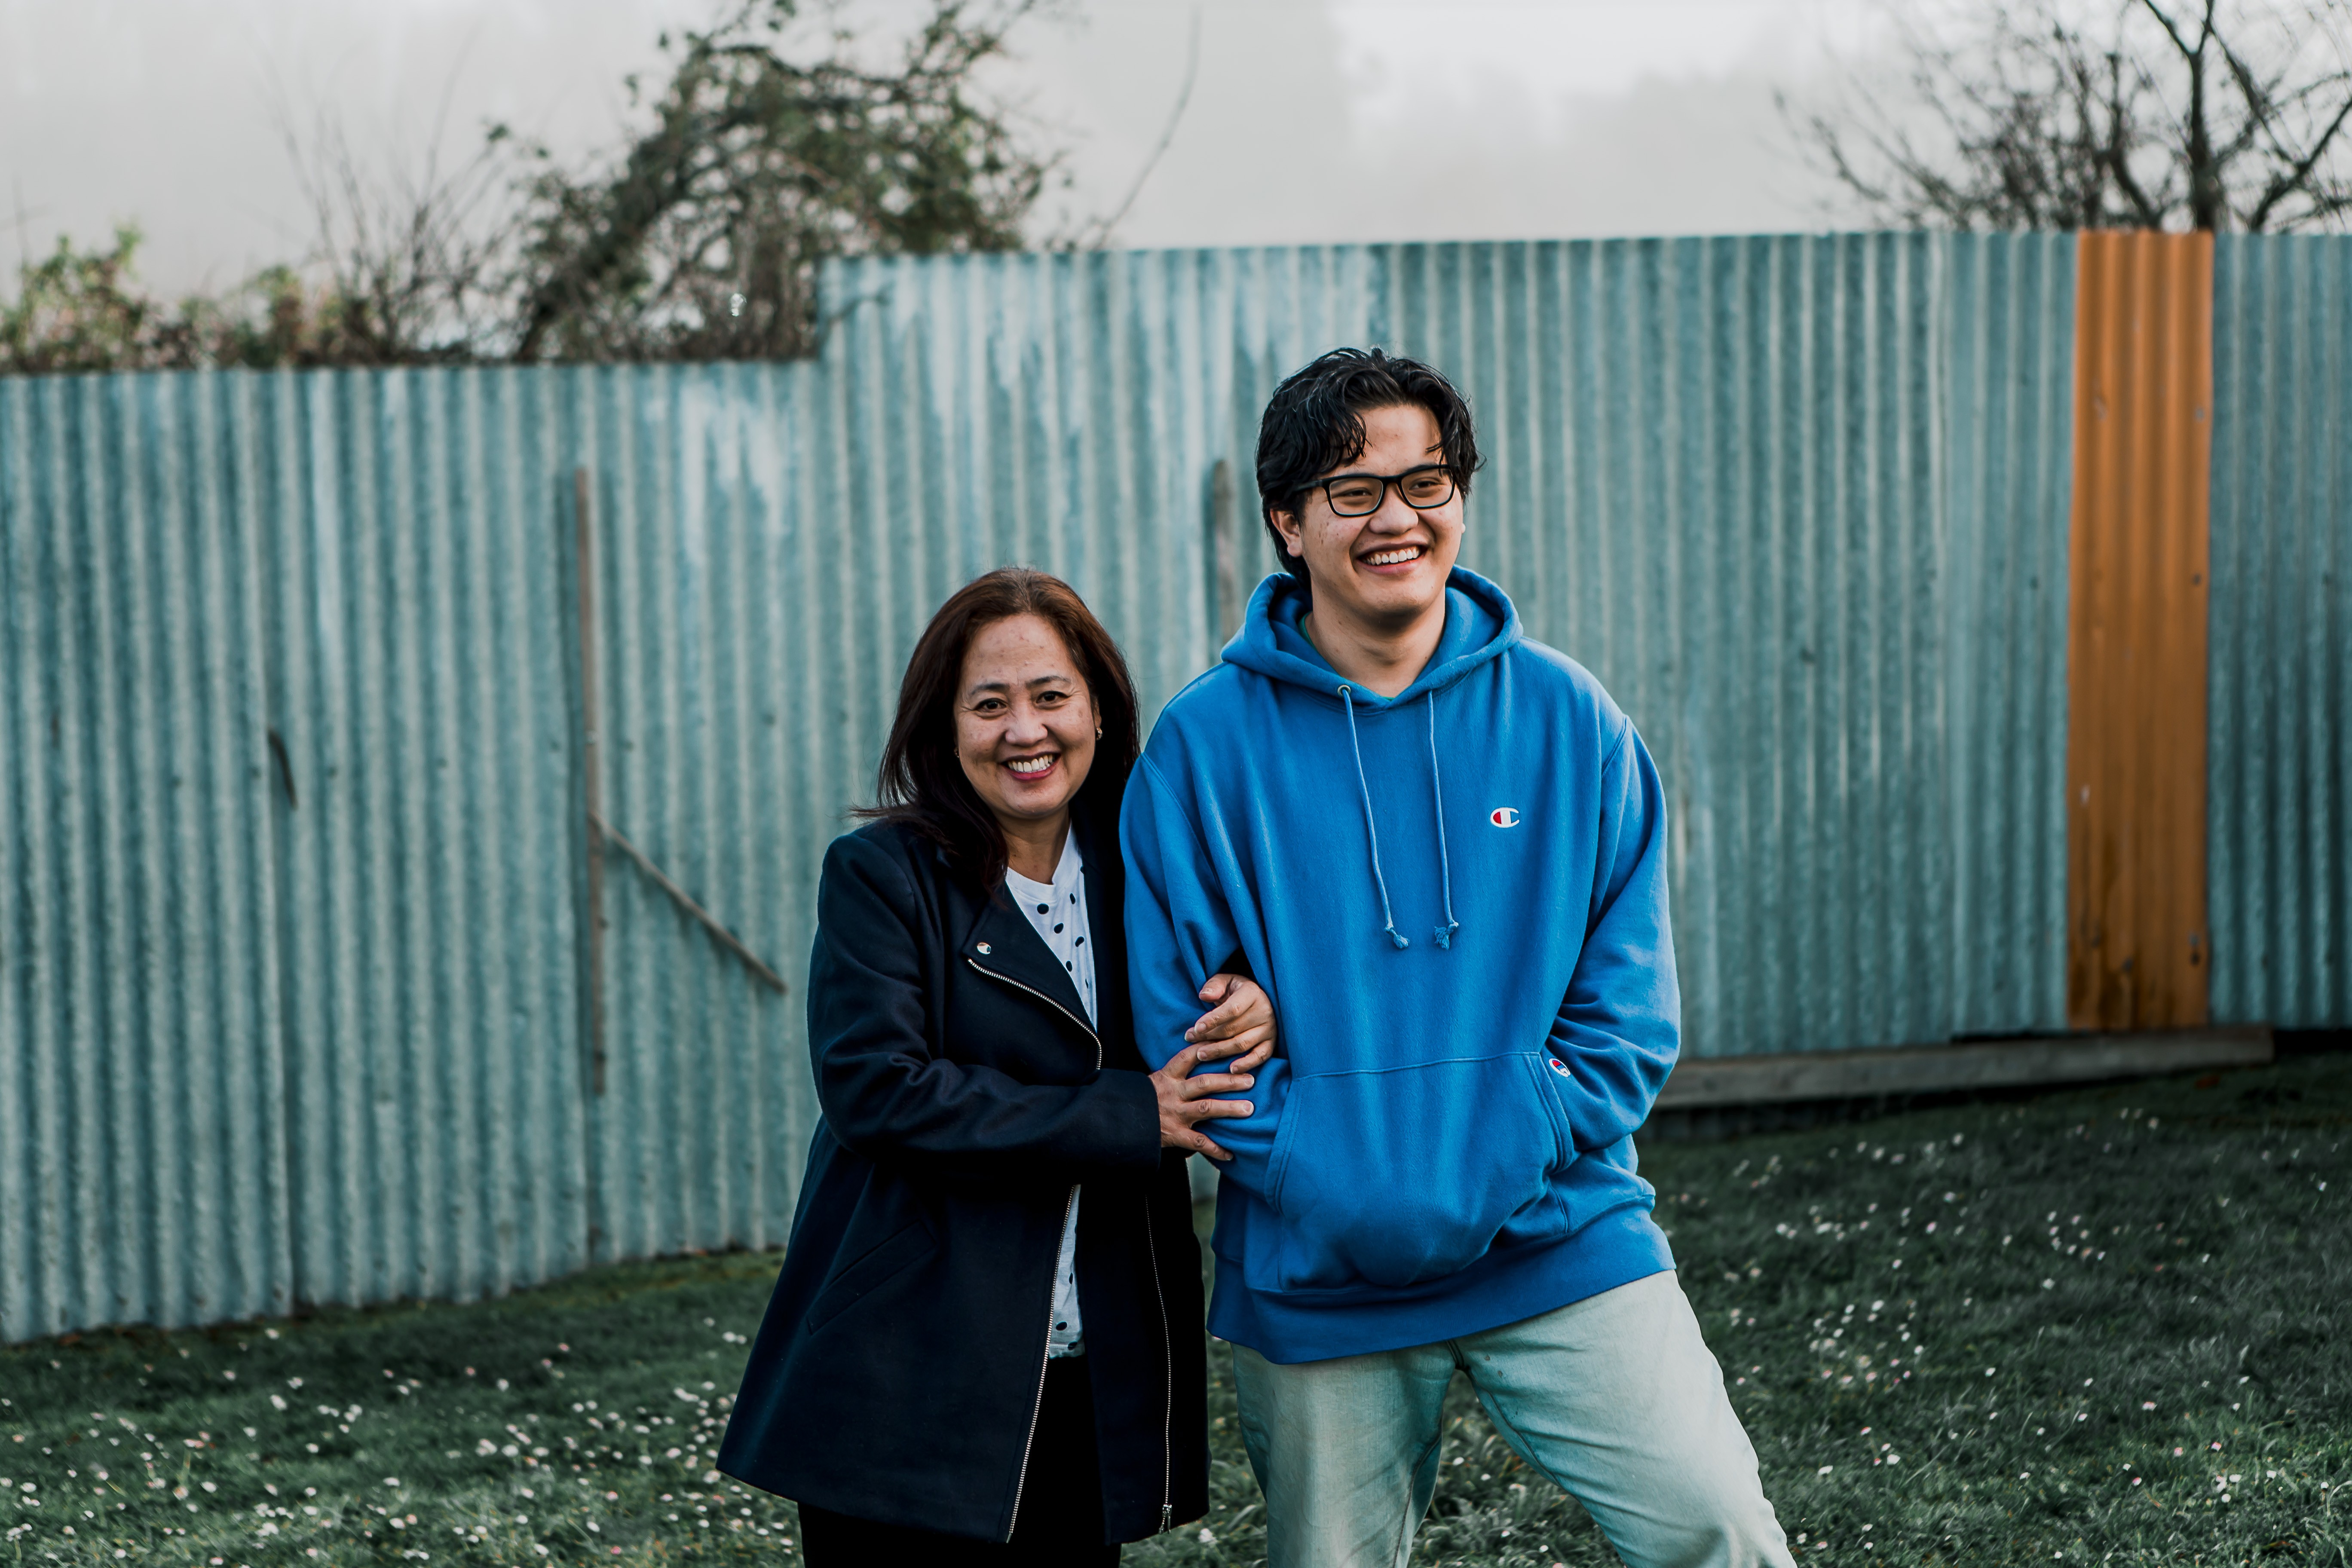 A mother and son arm in arm, smiling and laughing in a backyard.